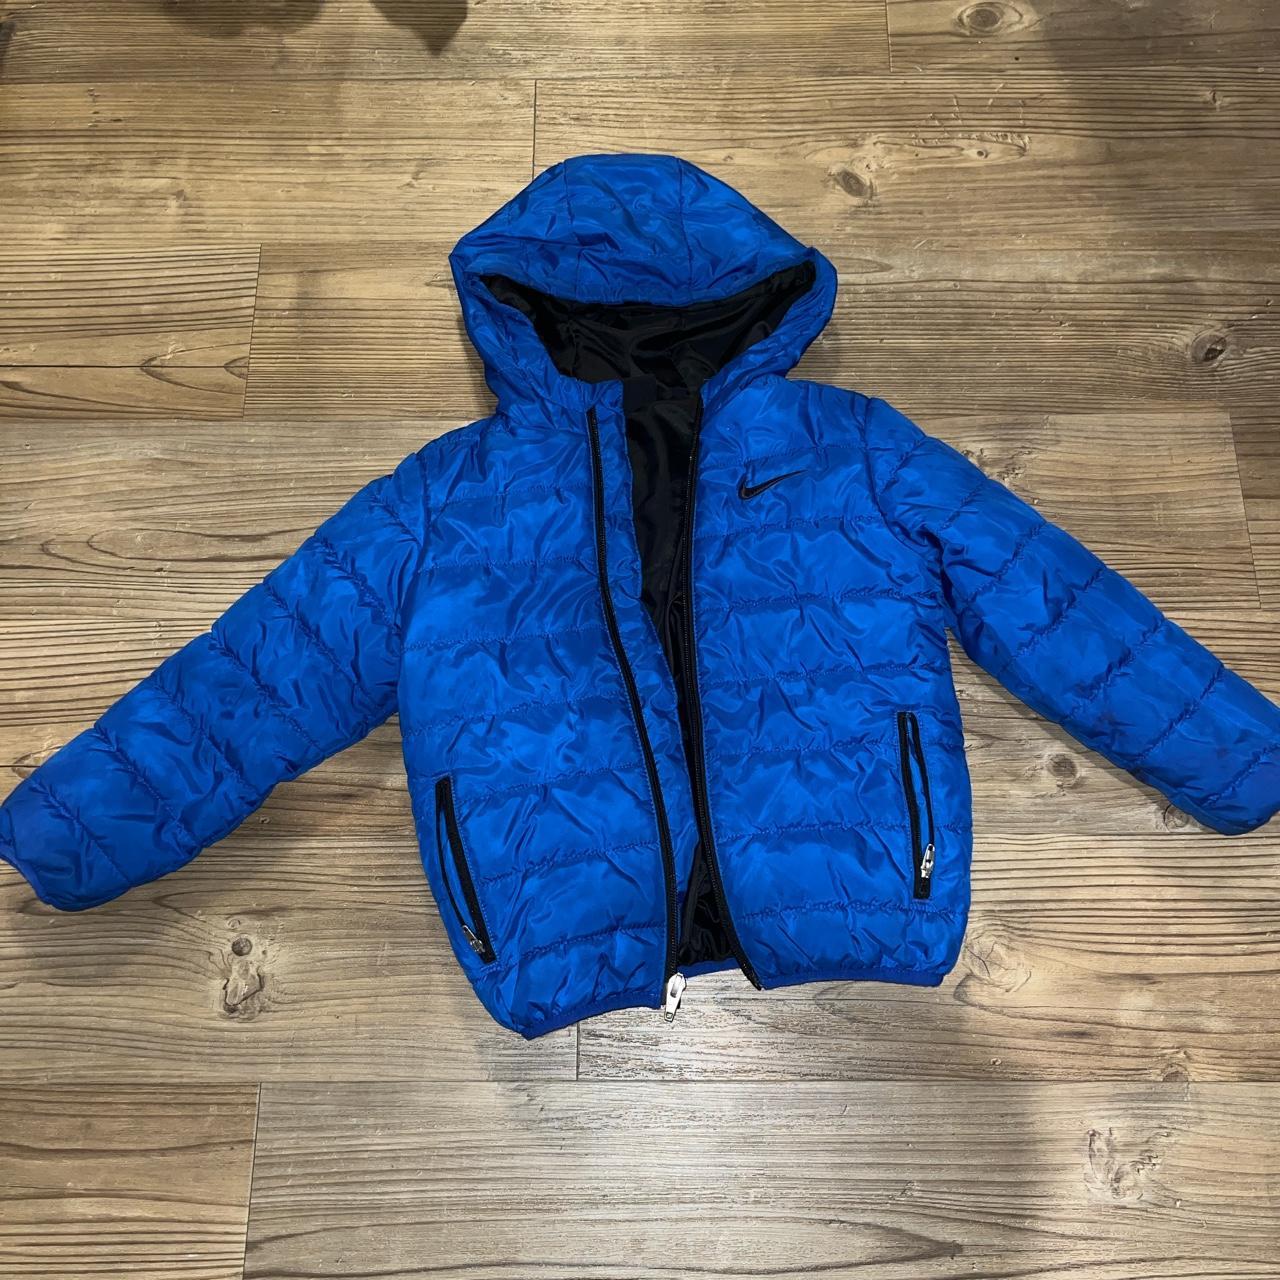 Nike toddler puffer coat Good conditions Size:... - Depop